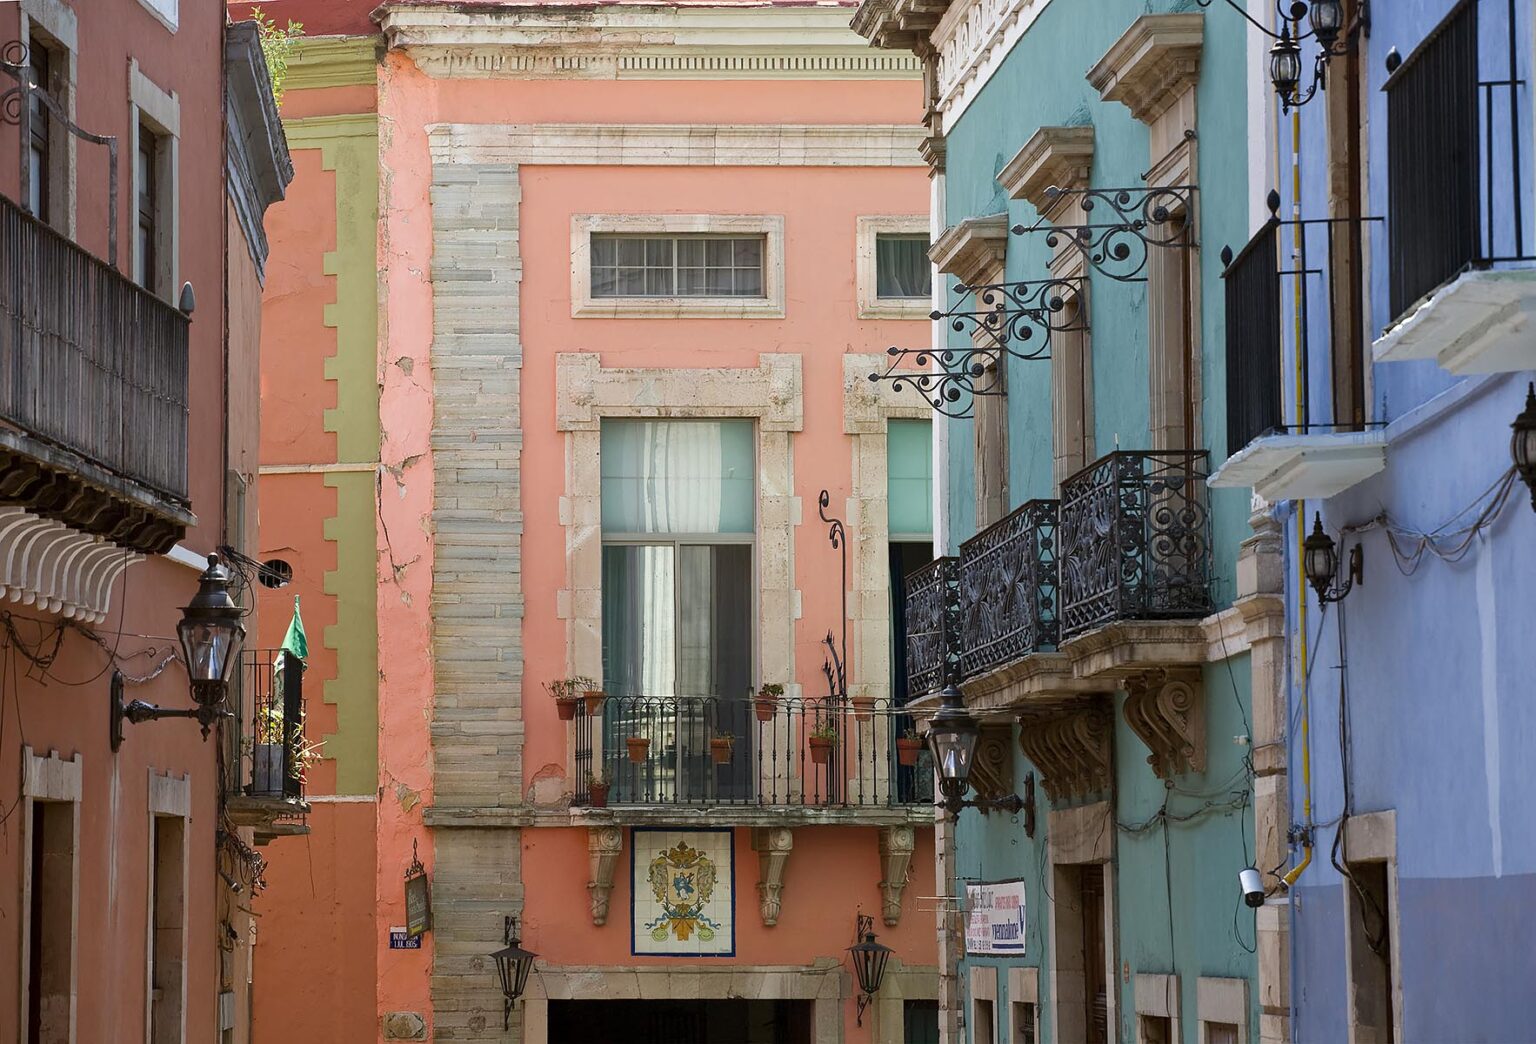 Bold and beautiful colors are painted on the walls of the houses in historic GUANAJUATO, MEXICO